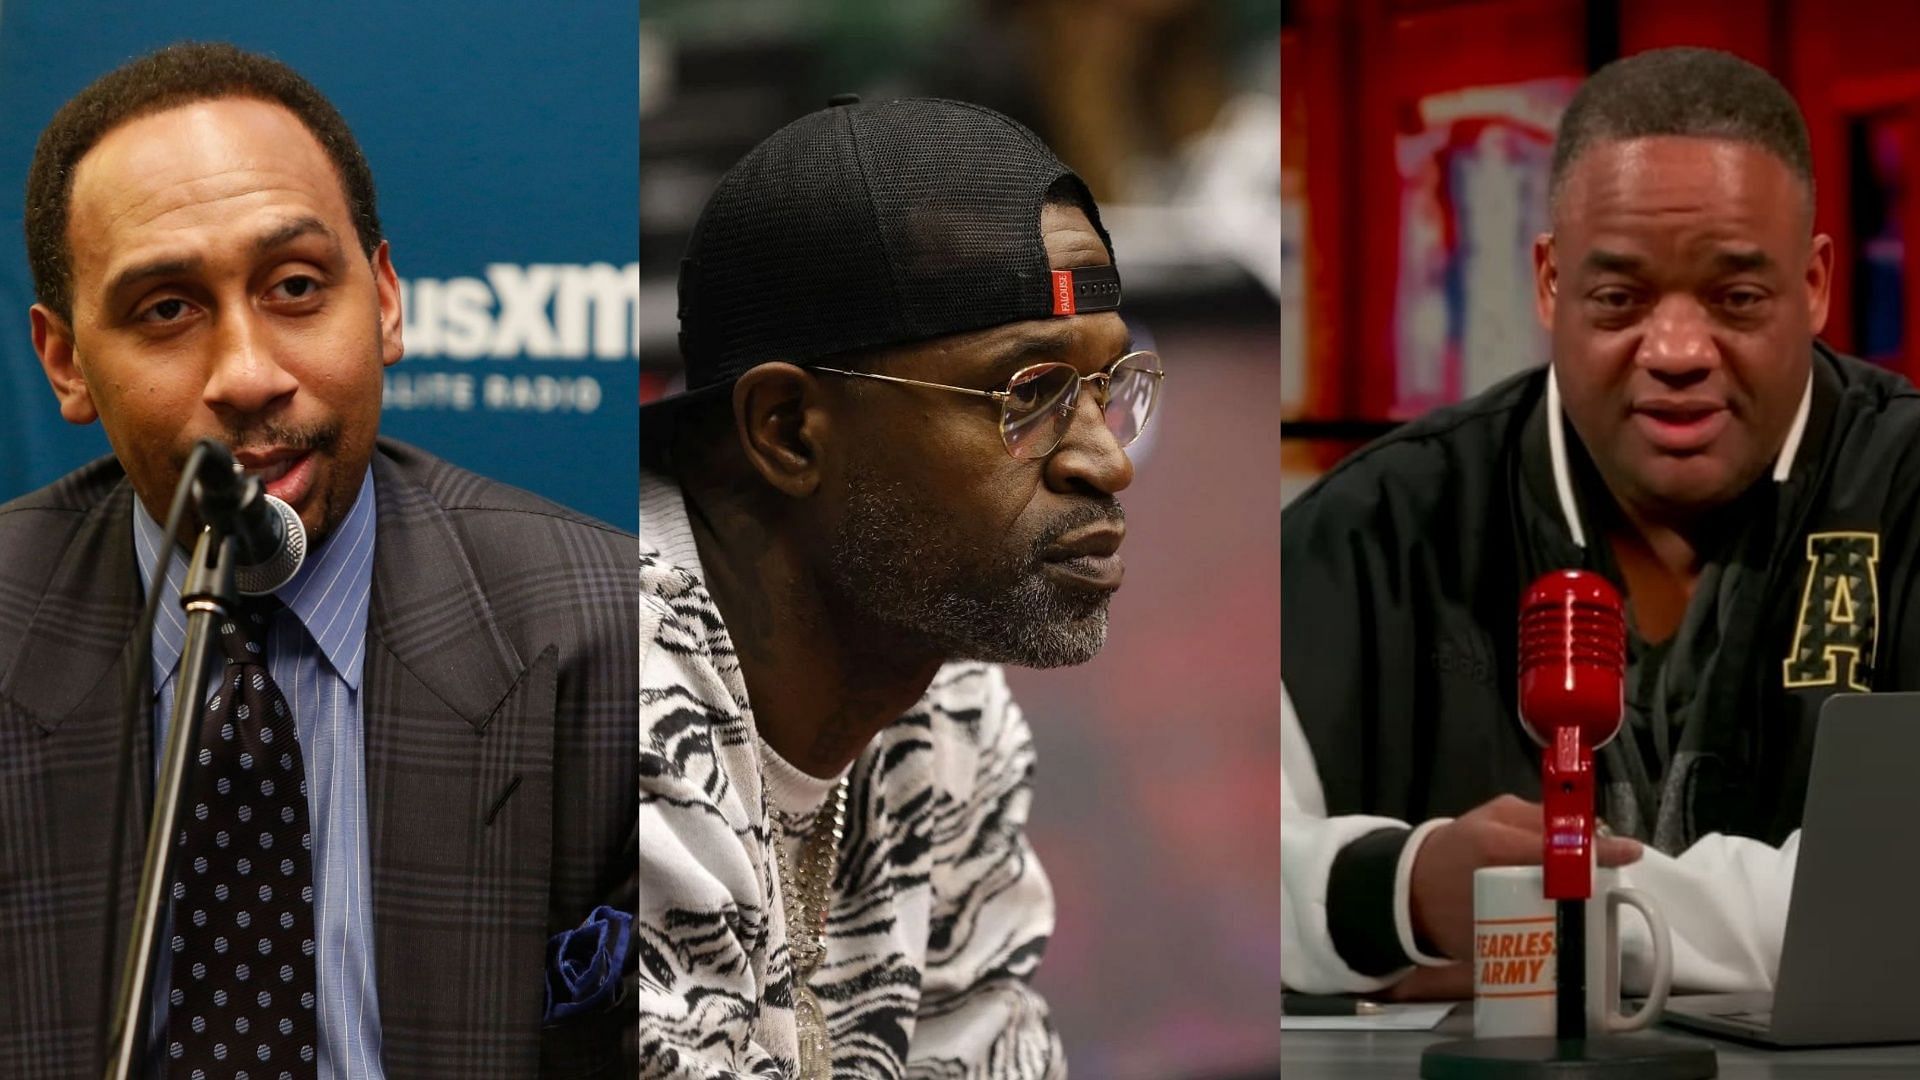 NBA Champion Stephen Jackson weighs in on Jason Whitlock amidst his beef with Stephen A. Smith